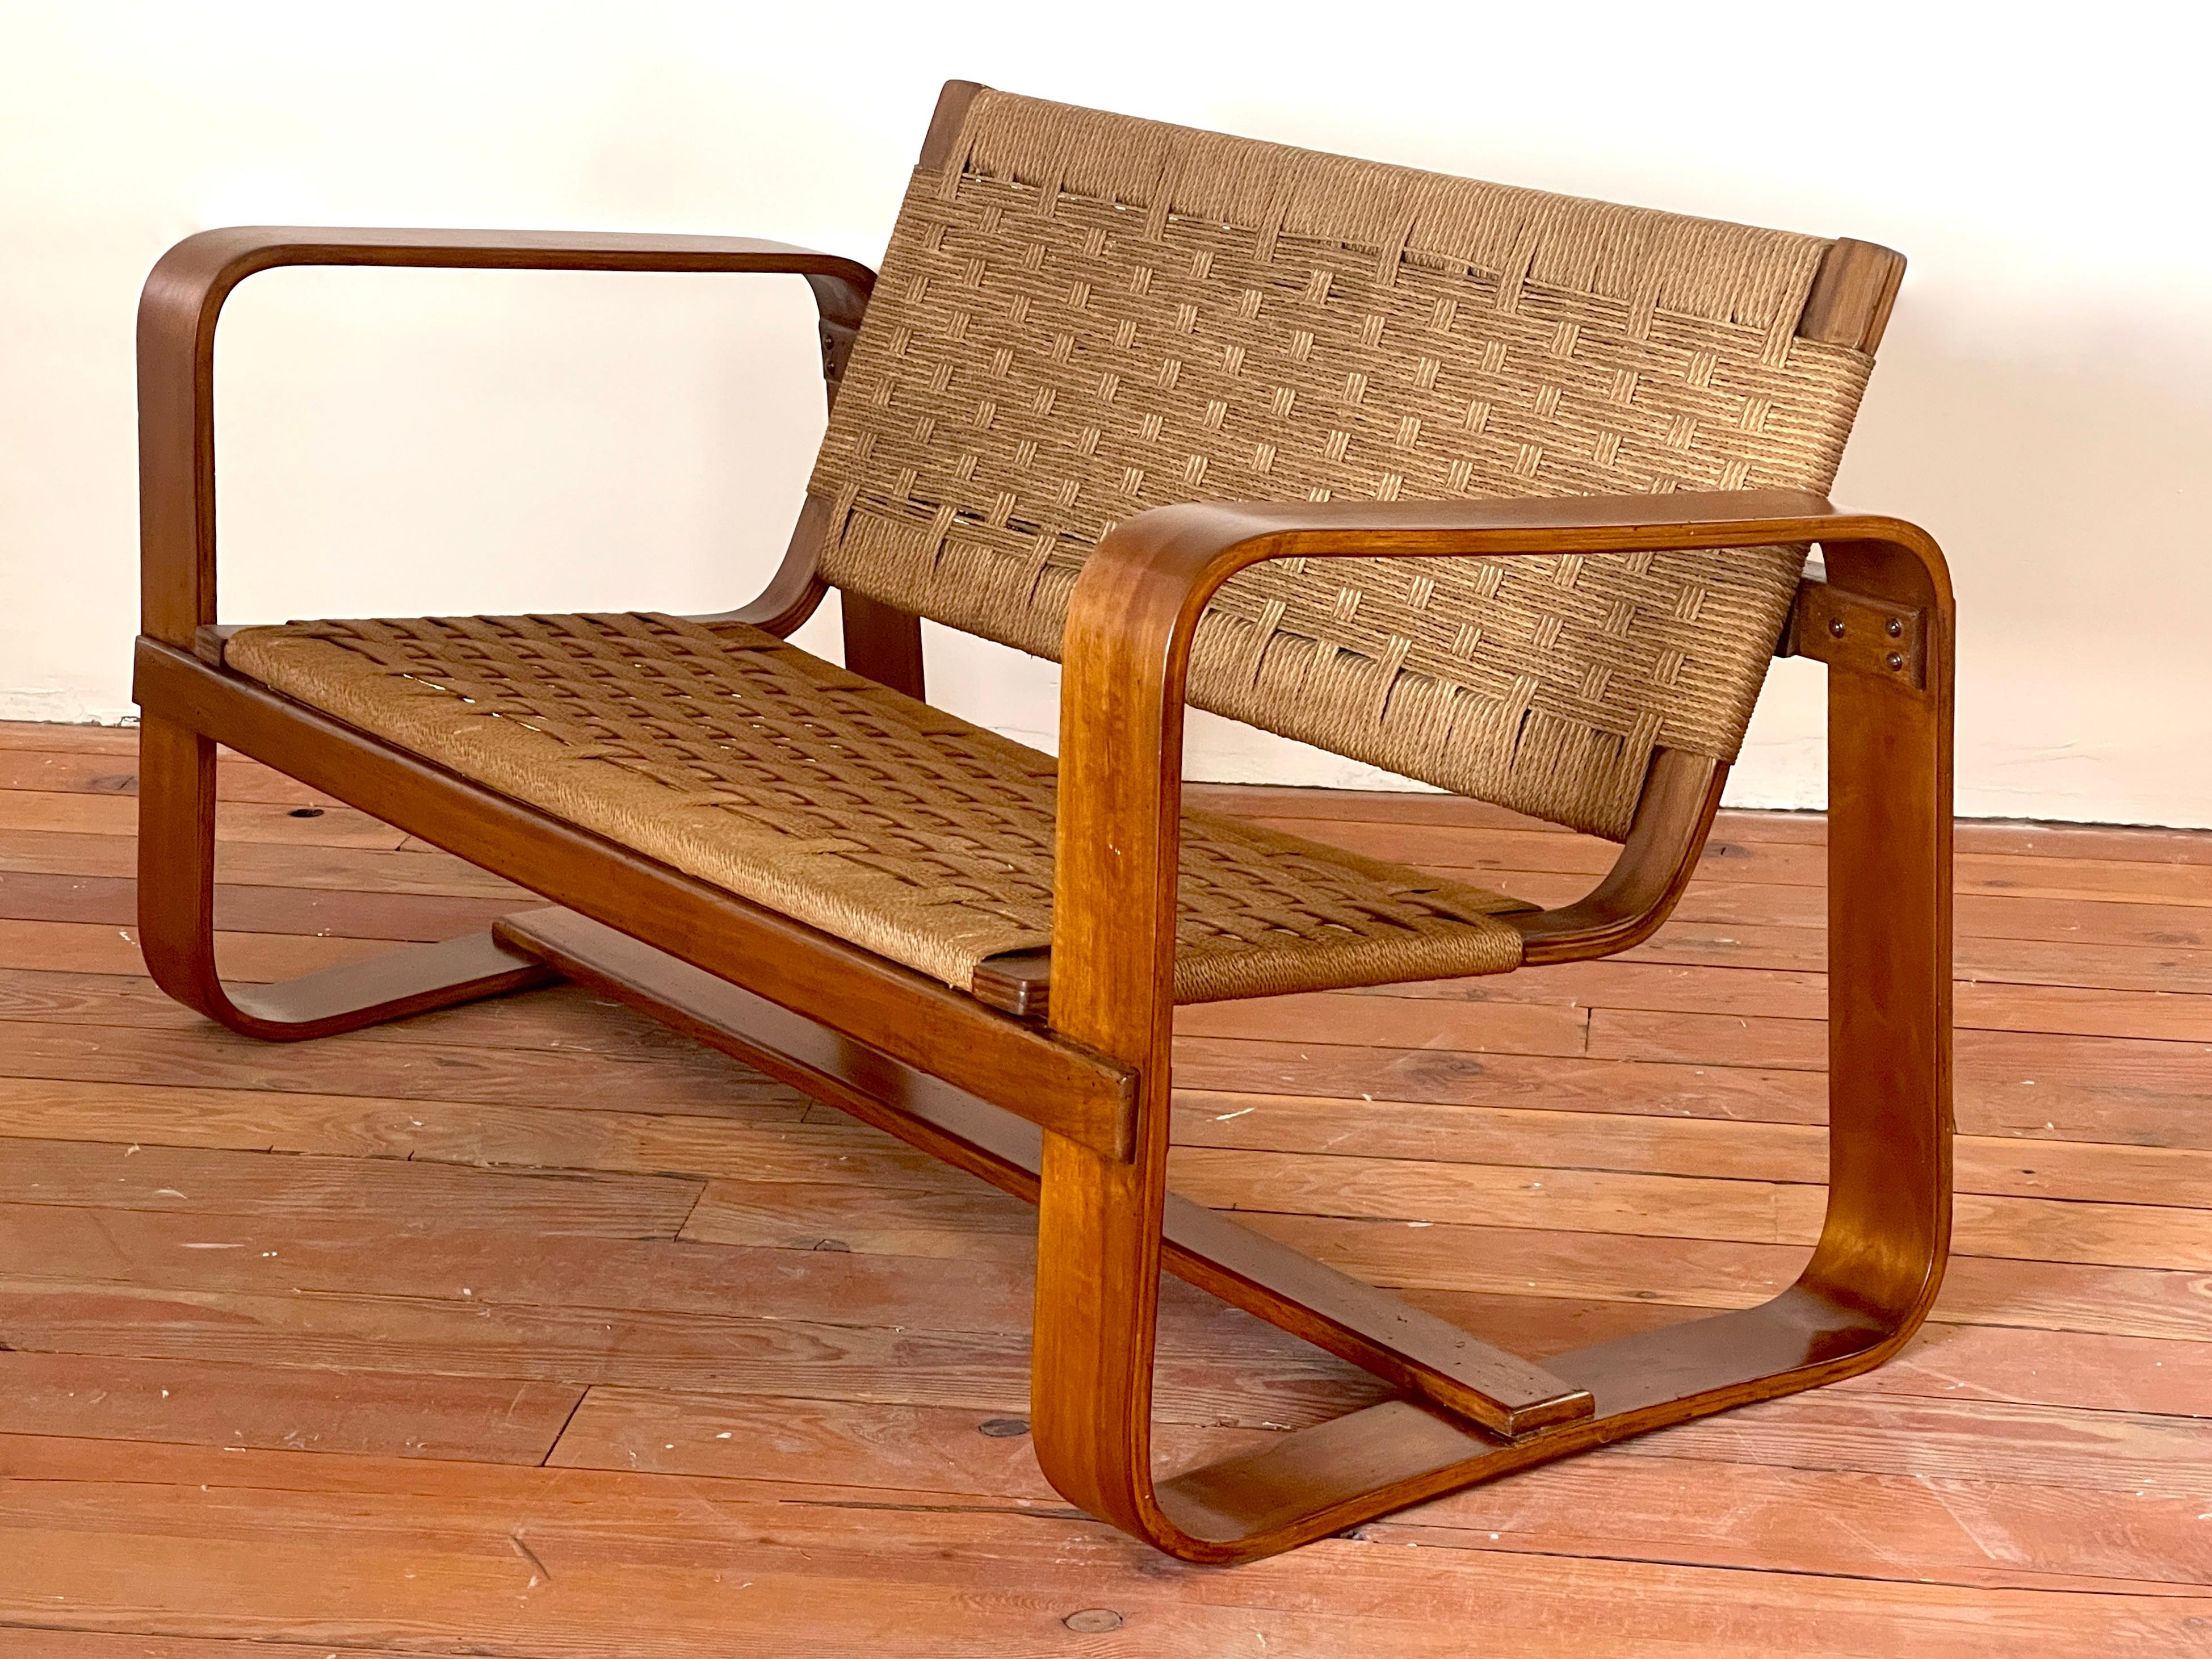 Guiseppe Pagano Pogatschnig Bench, 1939 For Sale 10